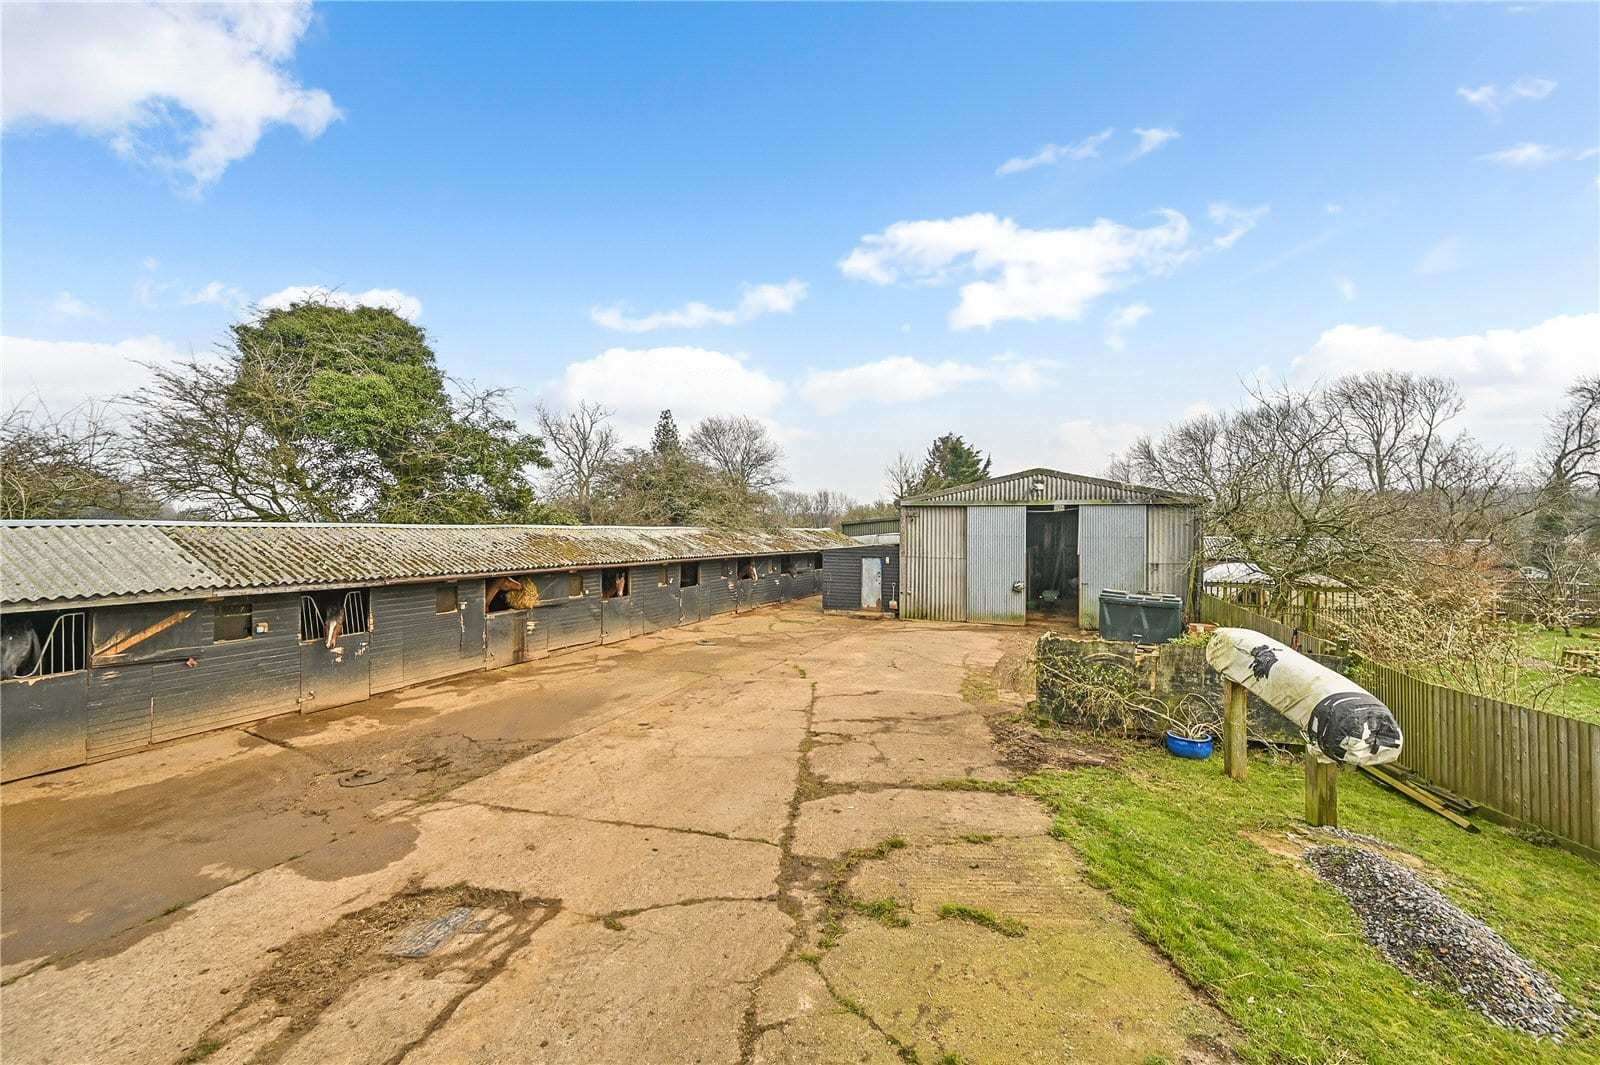 This farmhouse with horse stables is up for sale in Stowting. Picture: Hobbs Parker